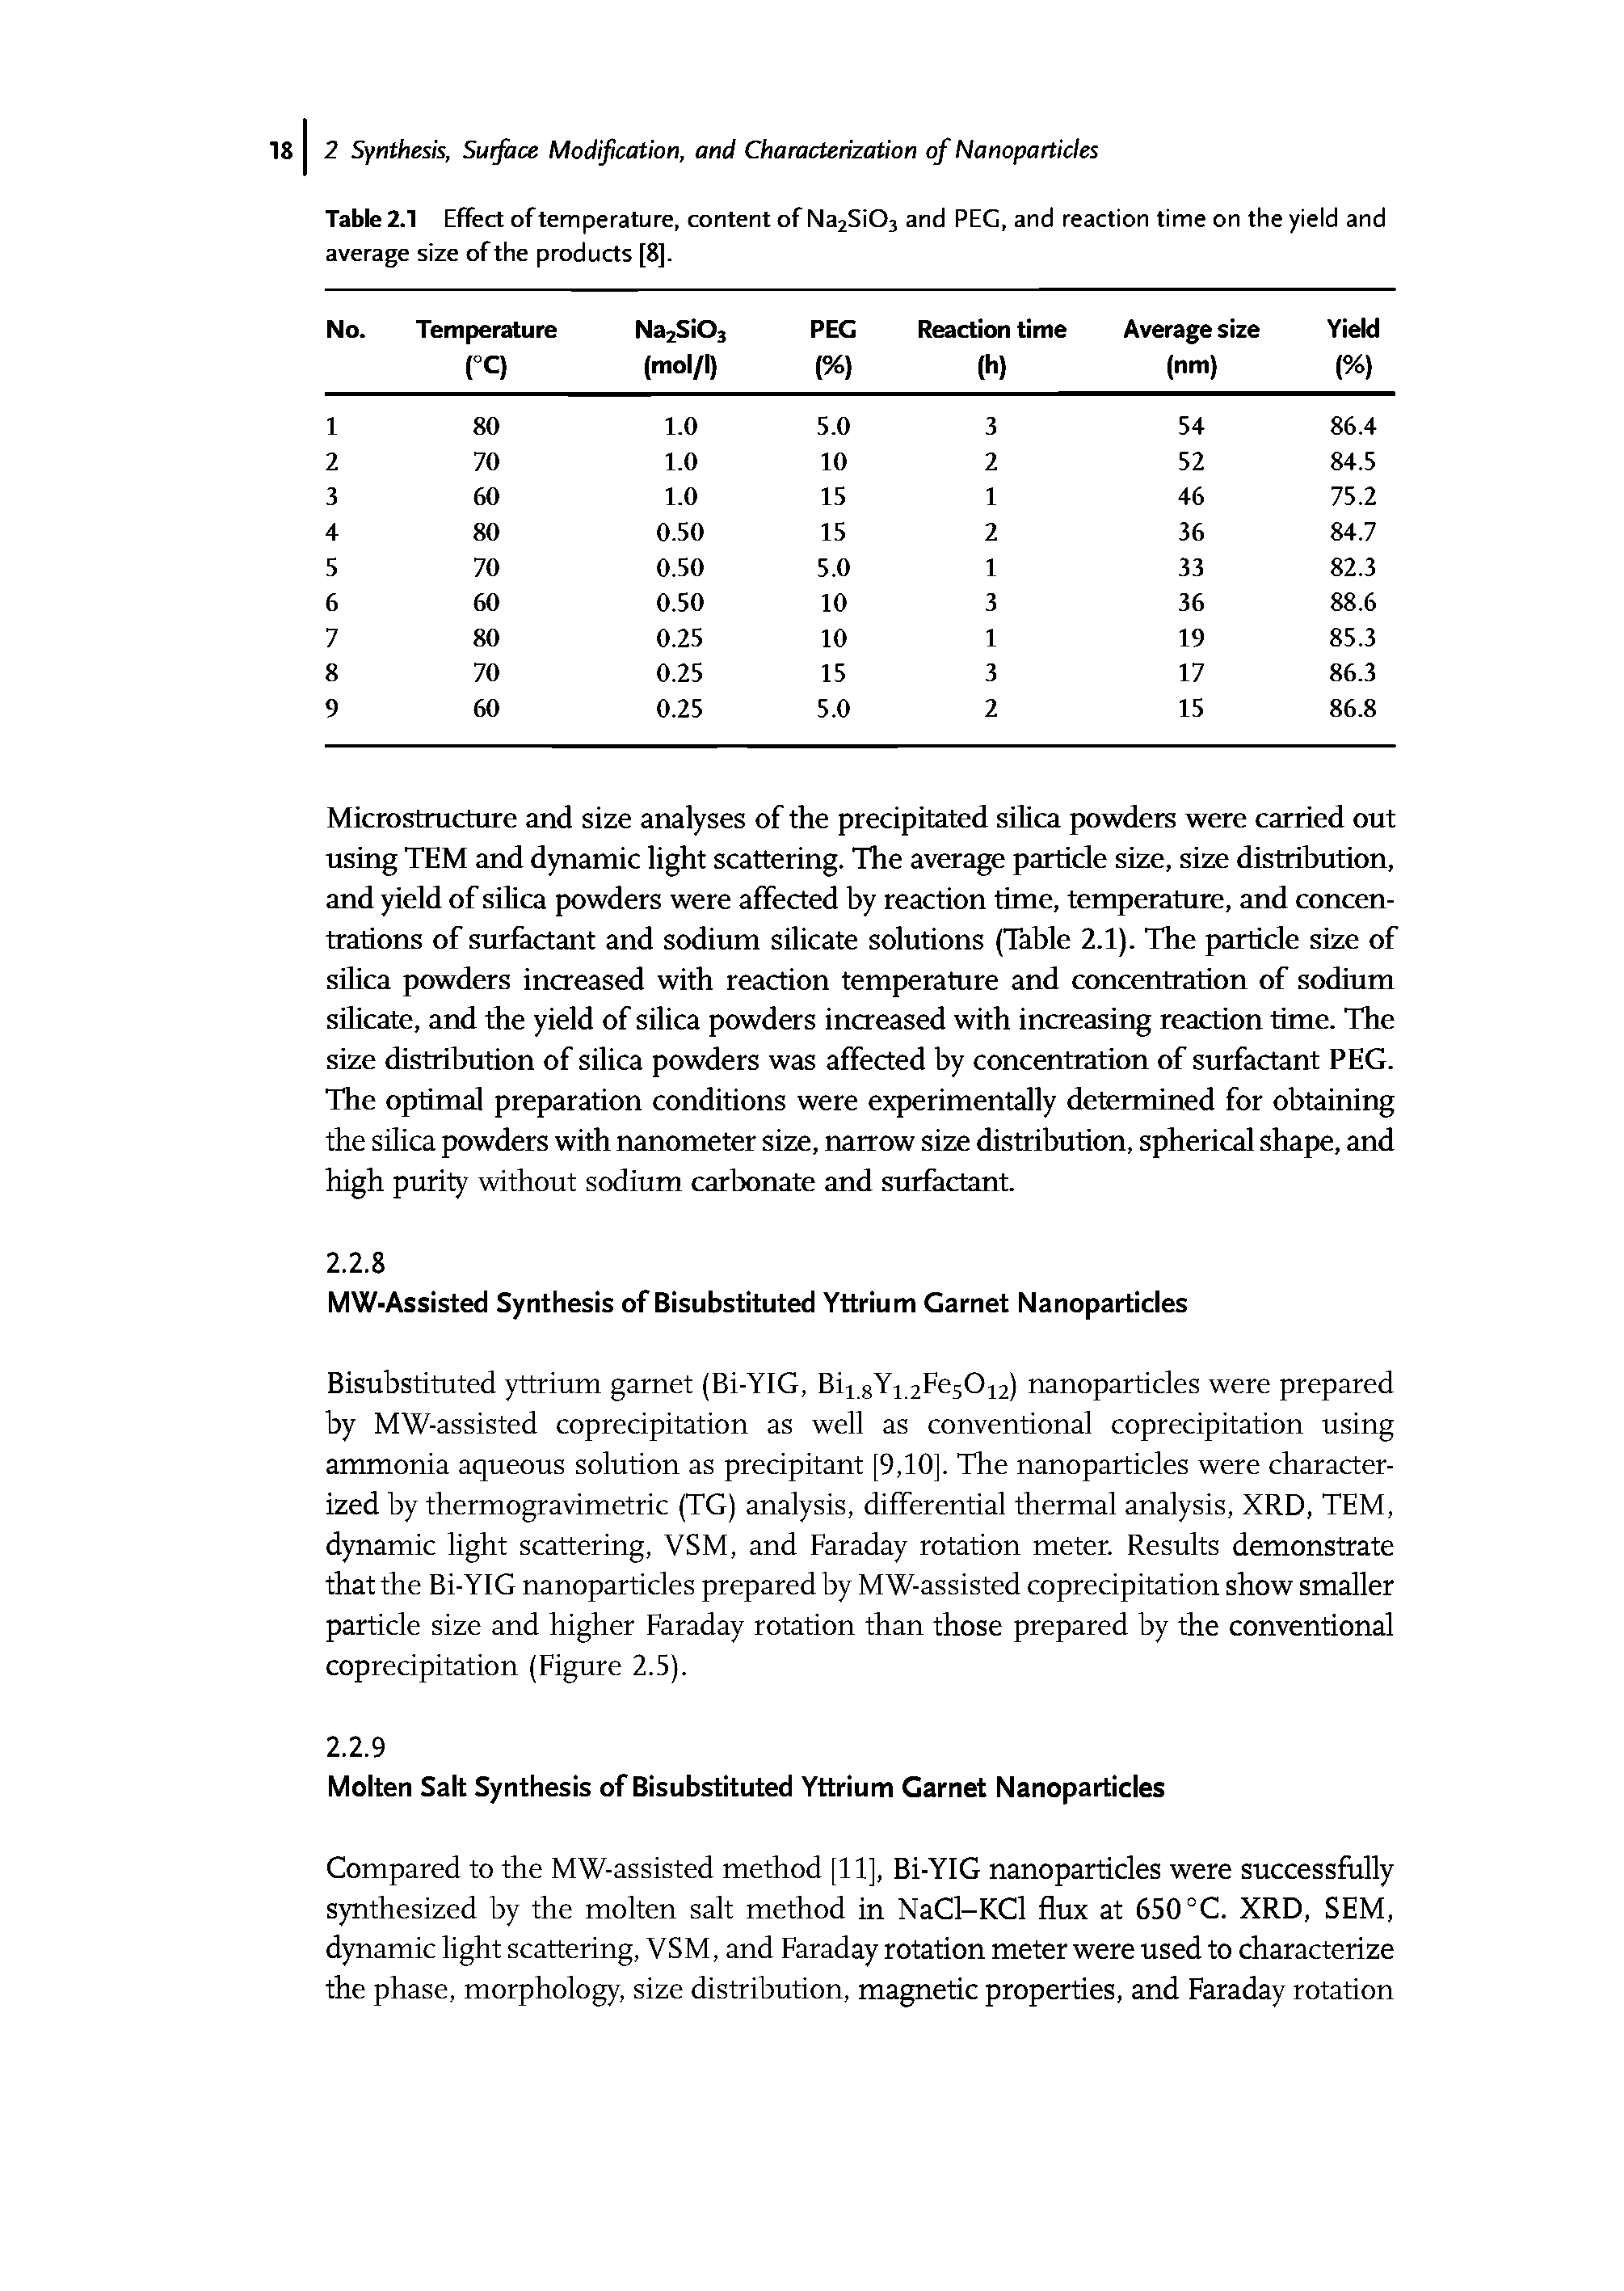 Table 2.1 Effect of temperature, content of Na2Si03 and PEG, and reaction time on the yield and average size of the products [8].